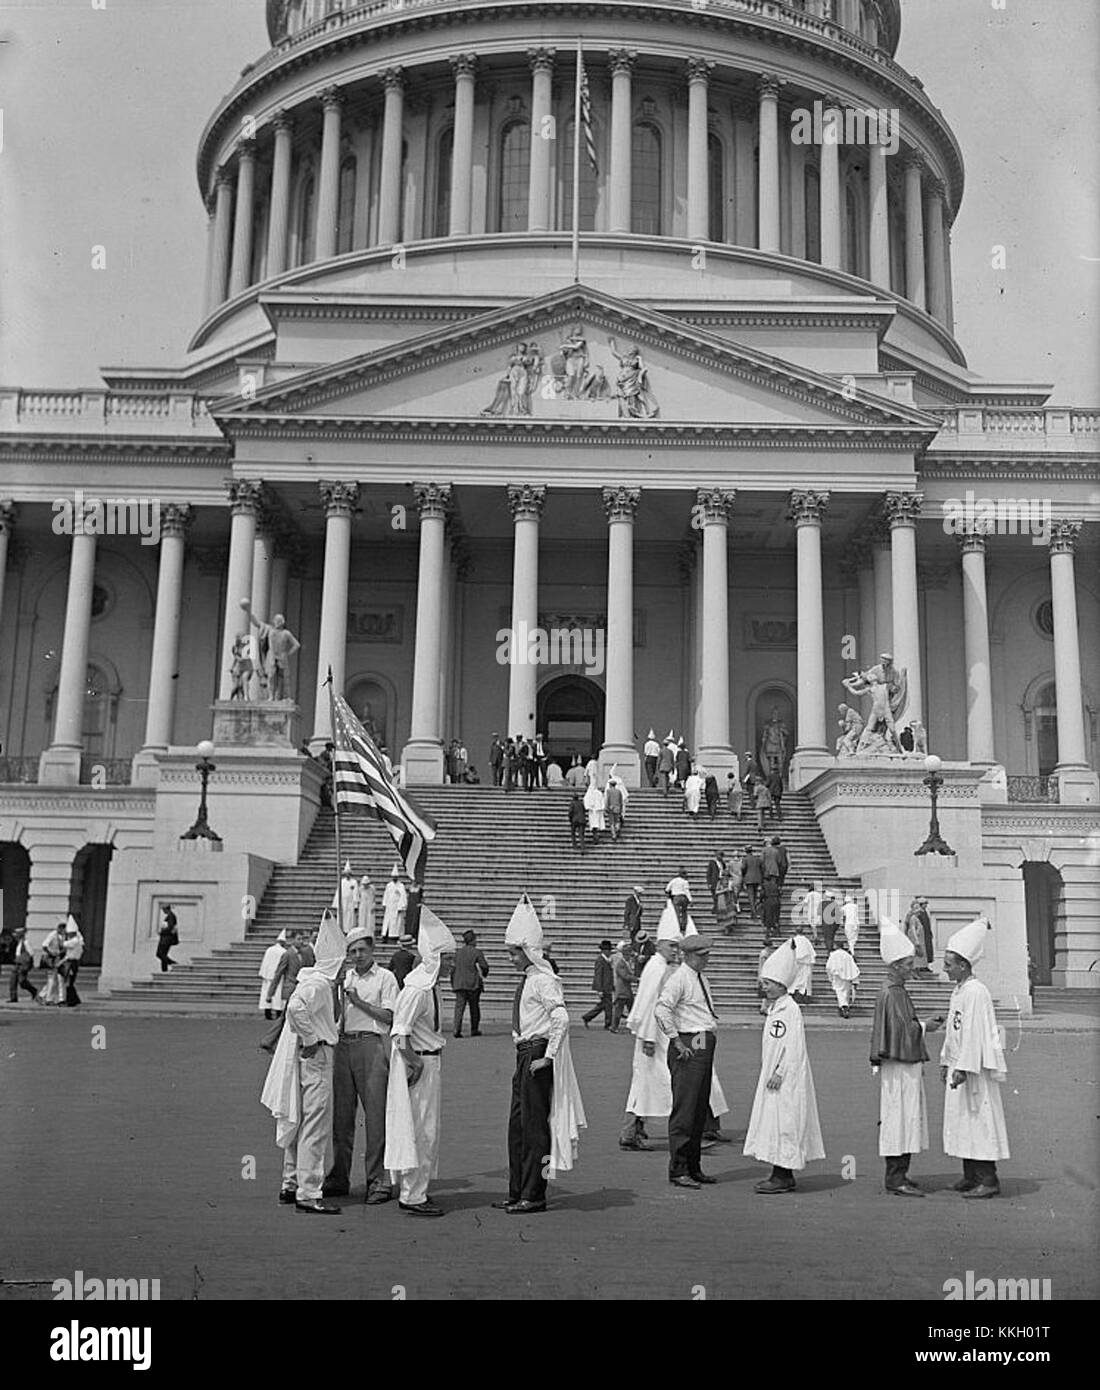 Klansmen sightseeing at the Capitol, 1925 Stock Photo